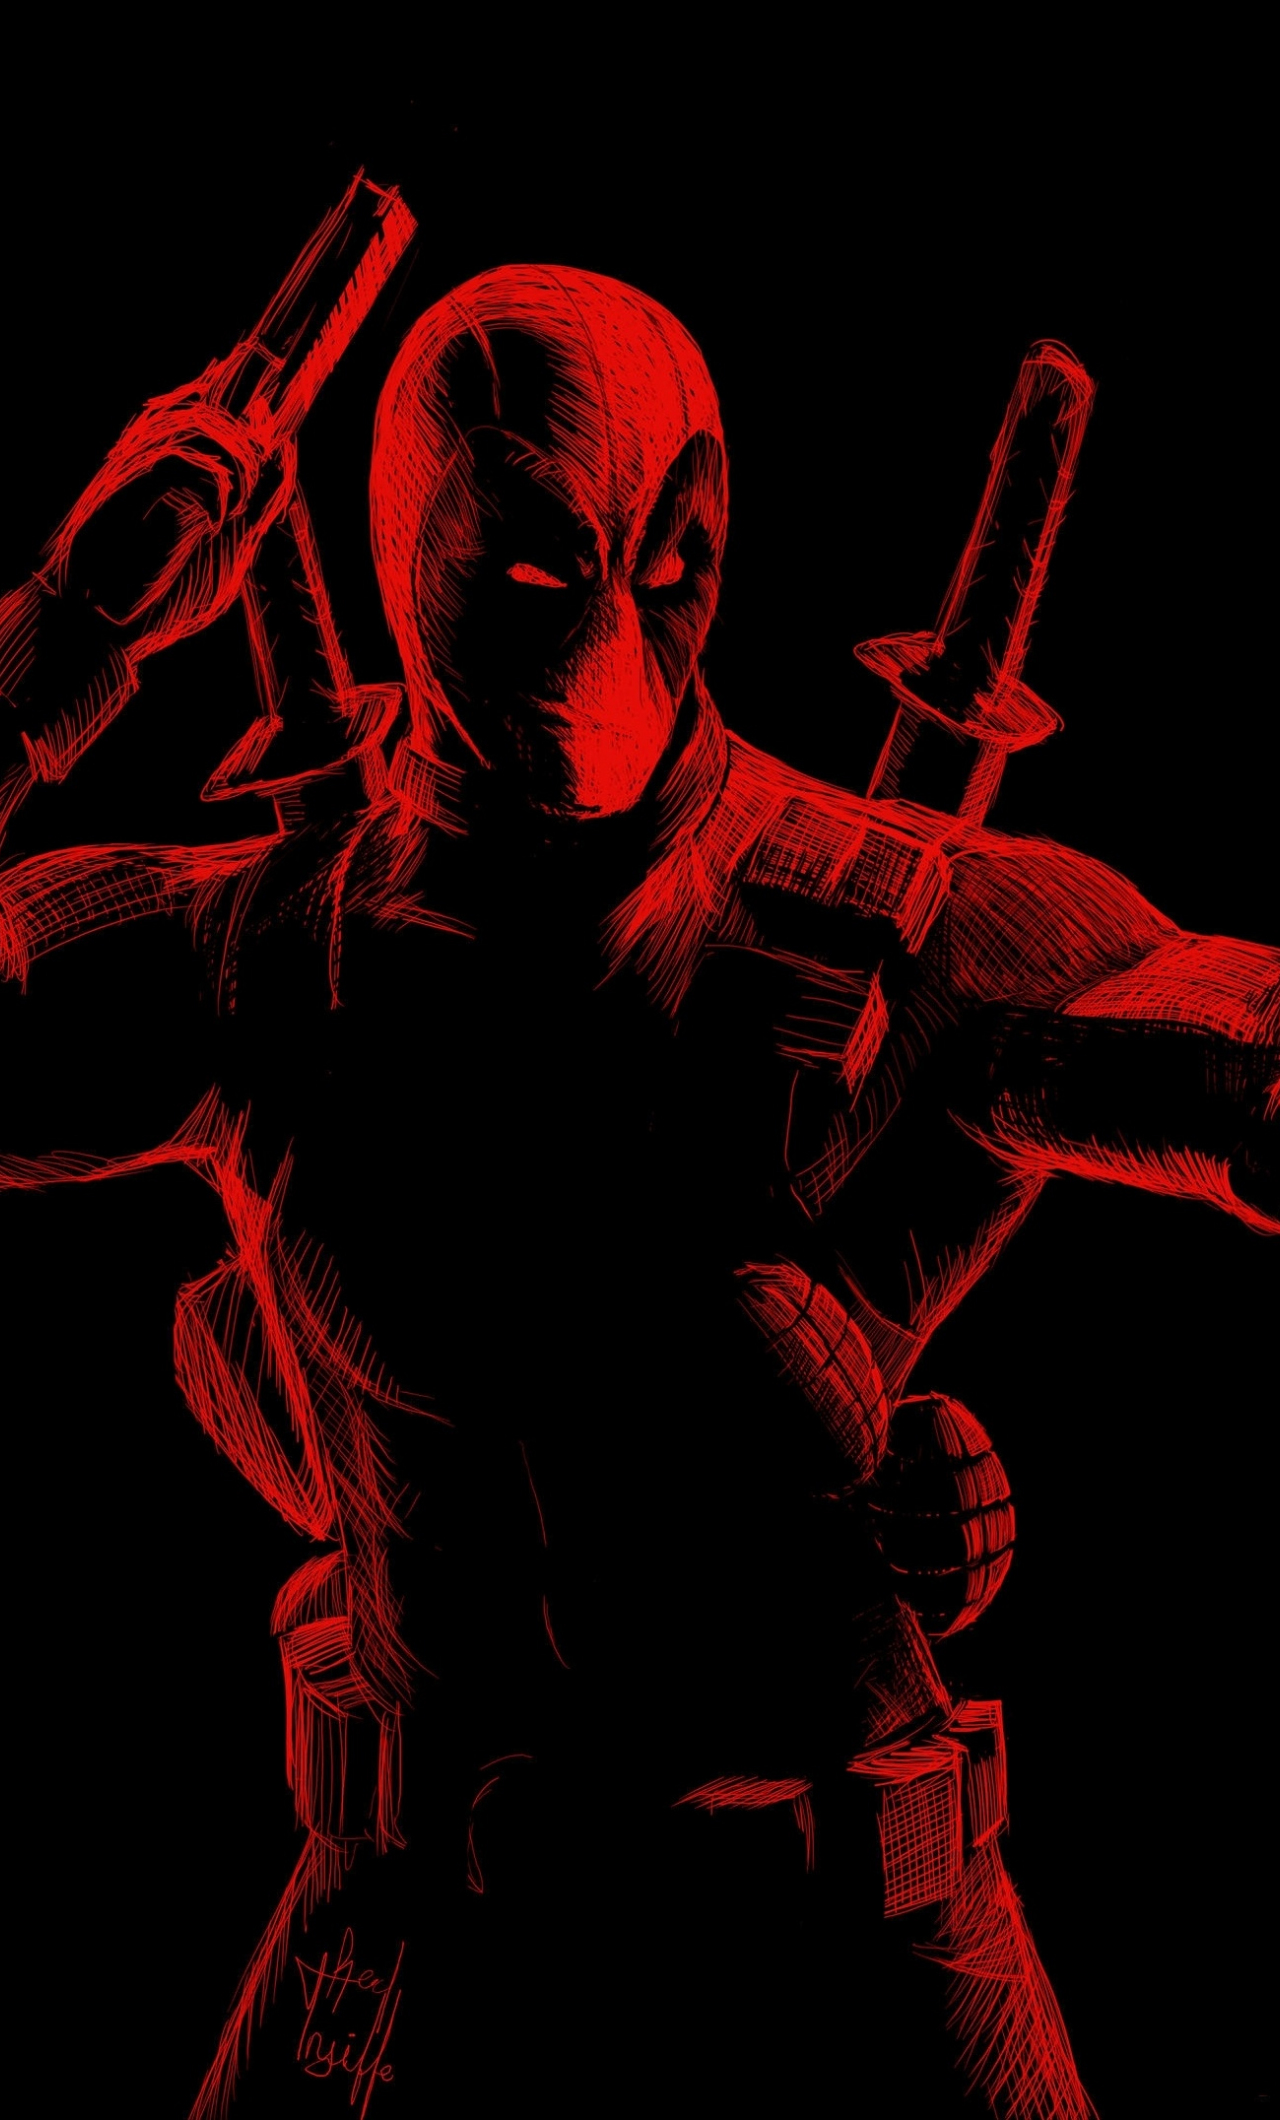 Download wallpaper 1280x2120 red, line arts, deadpool, iphone 6 plus,  1280x2120 hd background, 17517